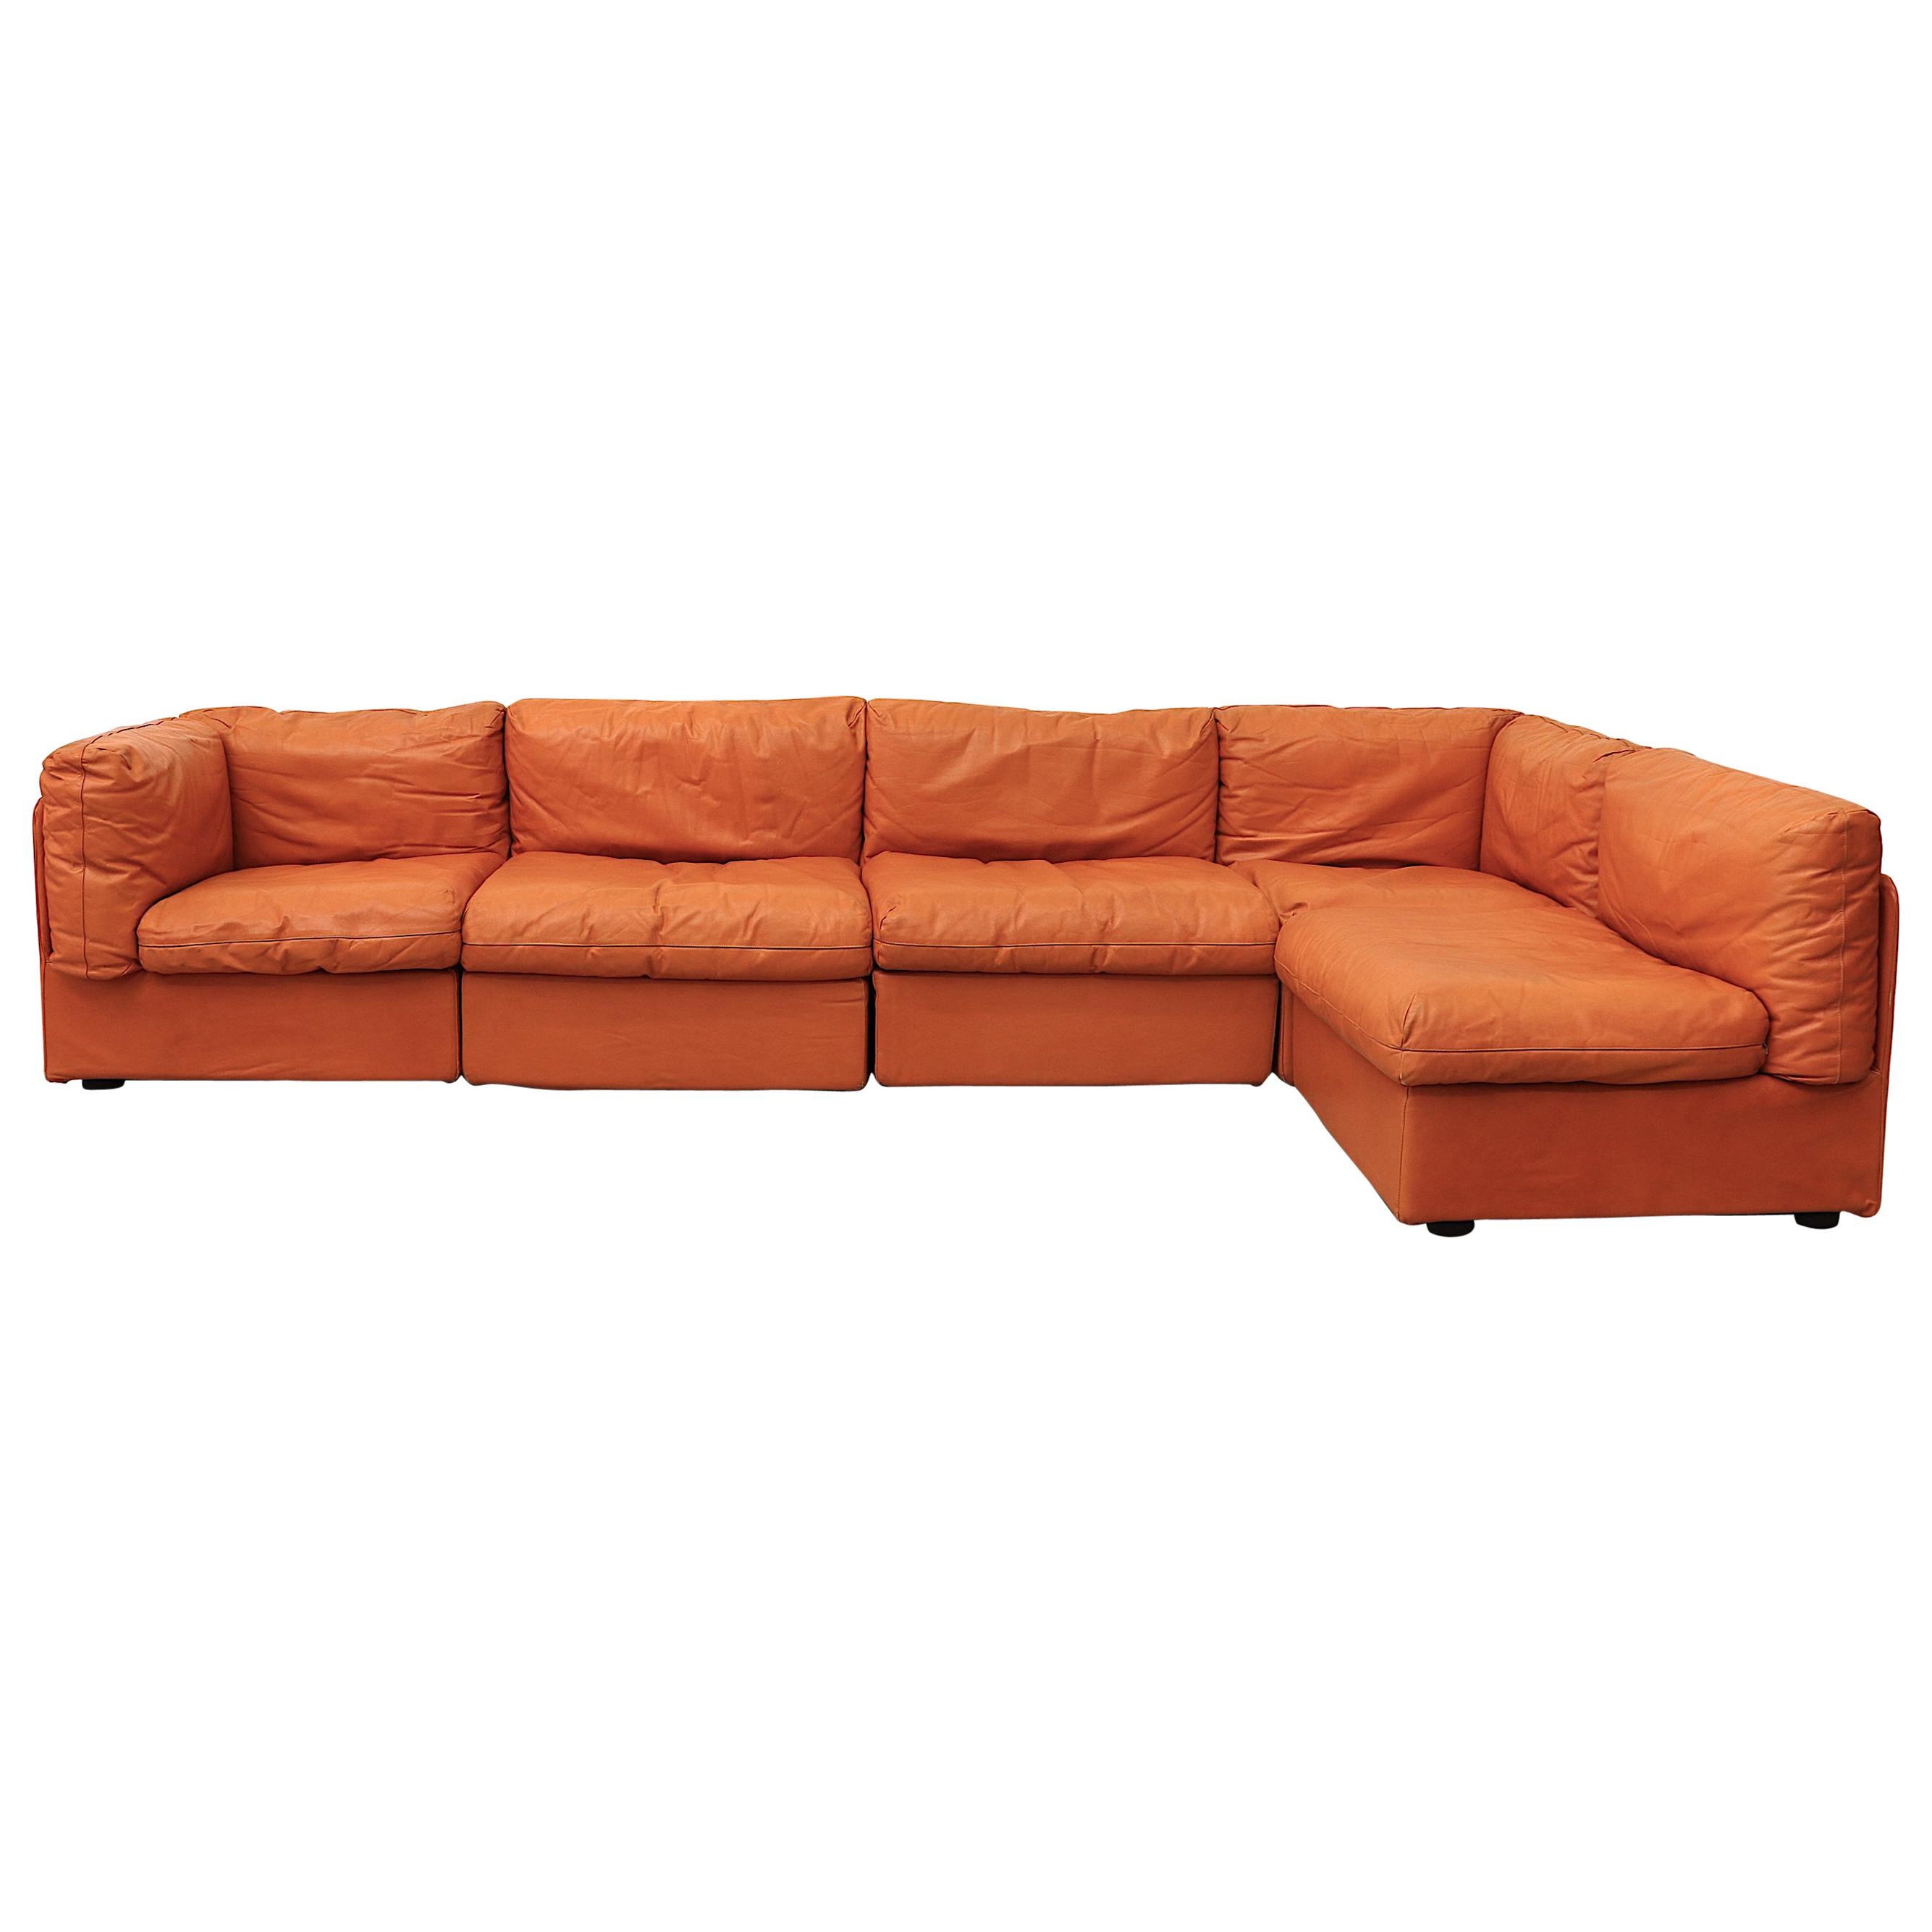 sale, sectional | orange sectionals Italian at italian orange sofa Bonacina for sectional Sofa Leather orange leather Orange 1stDibs Sectional leather sofa,